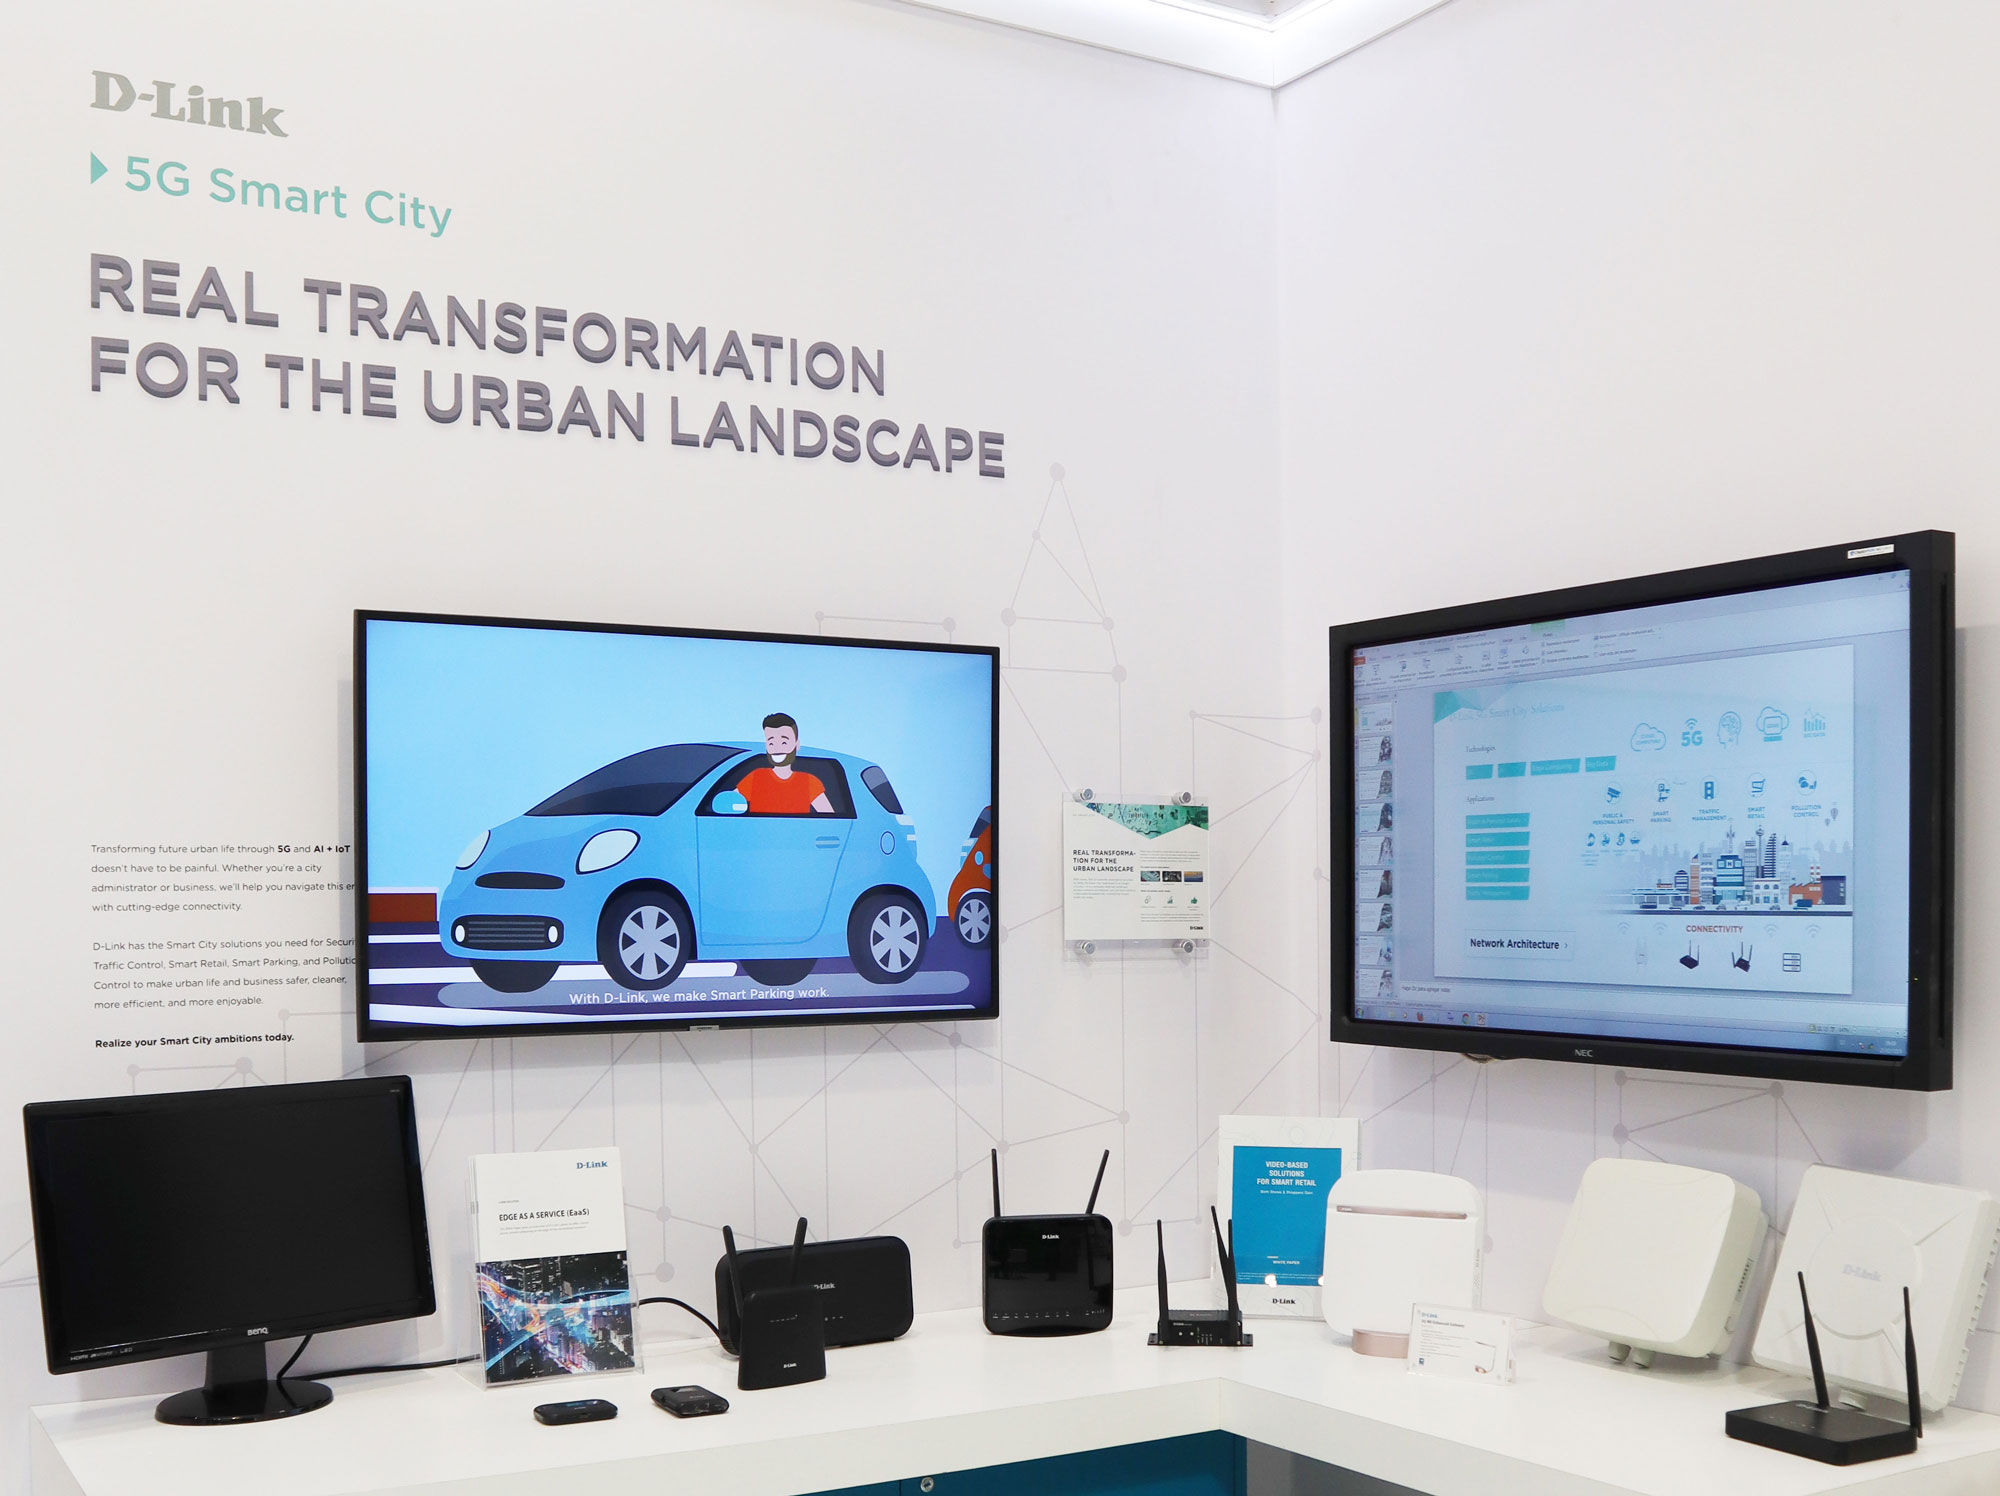 Smart City D-Link MWC Stand